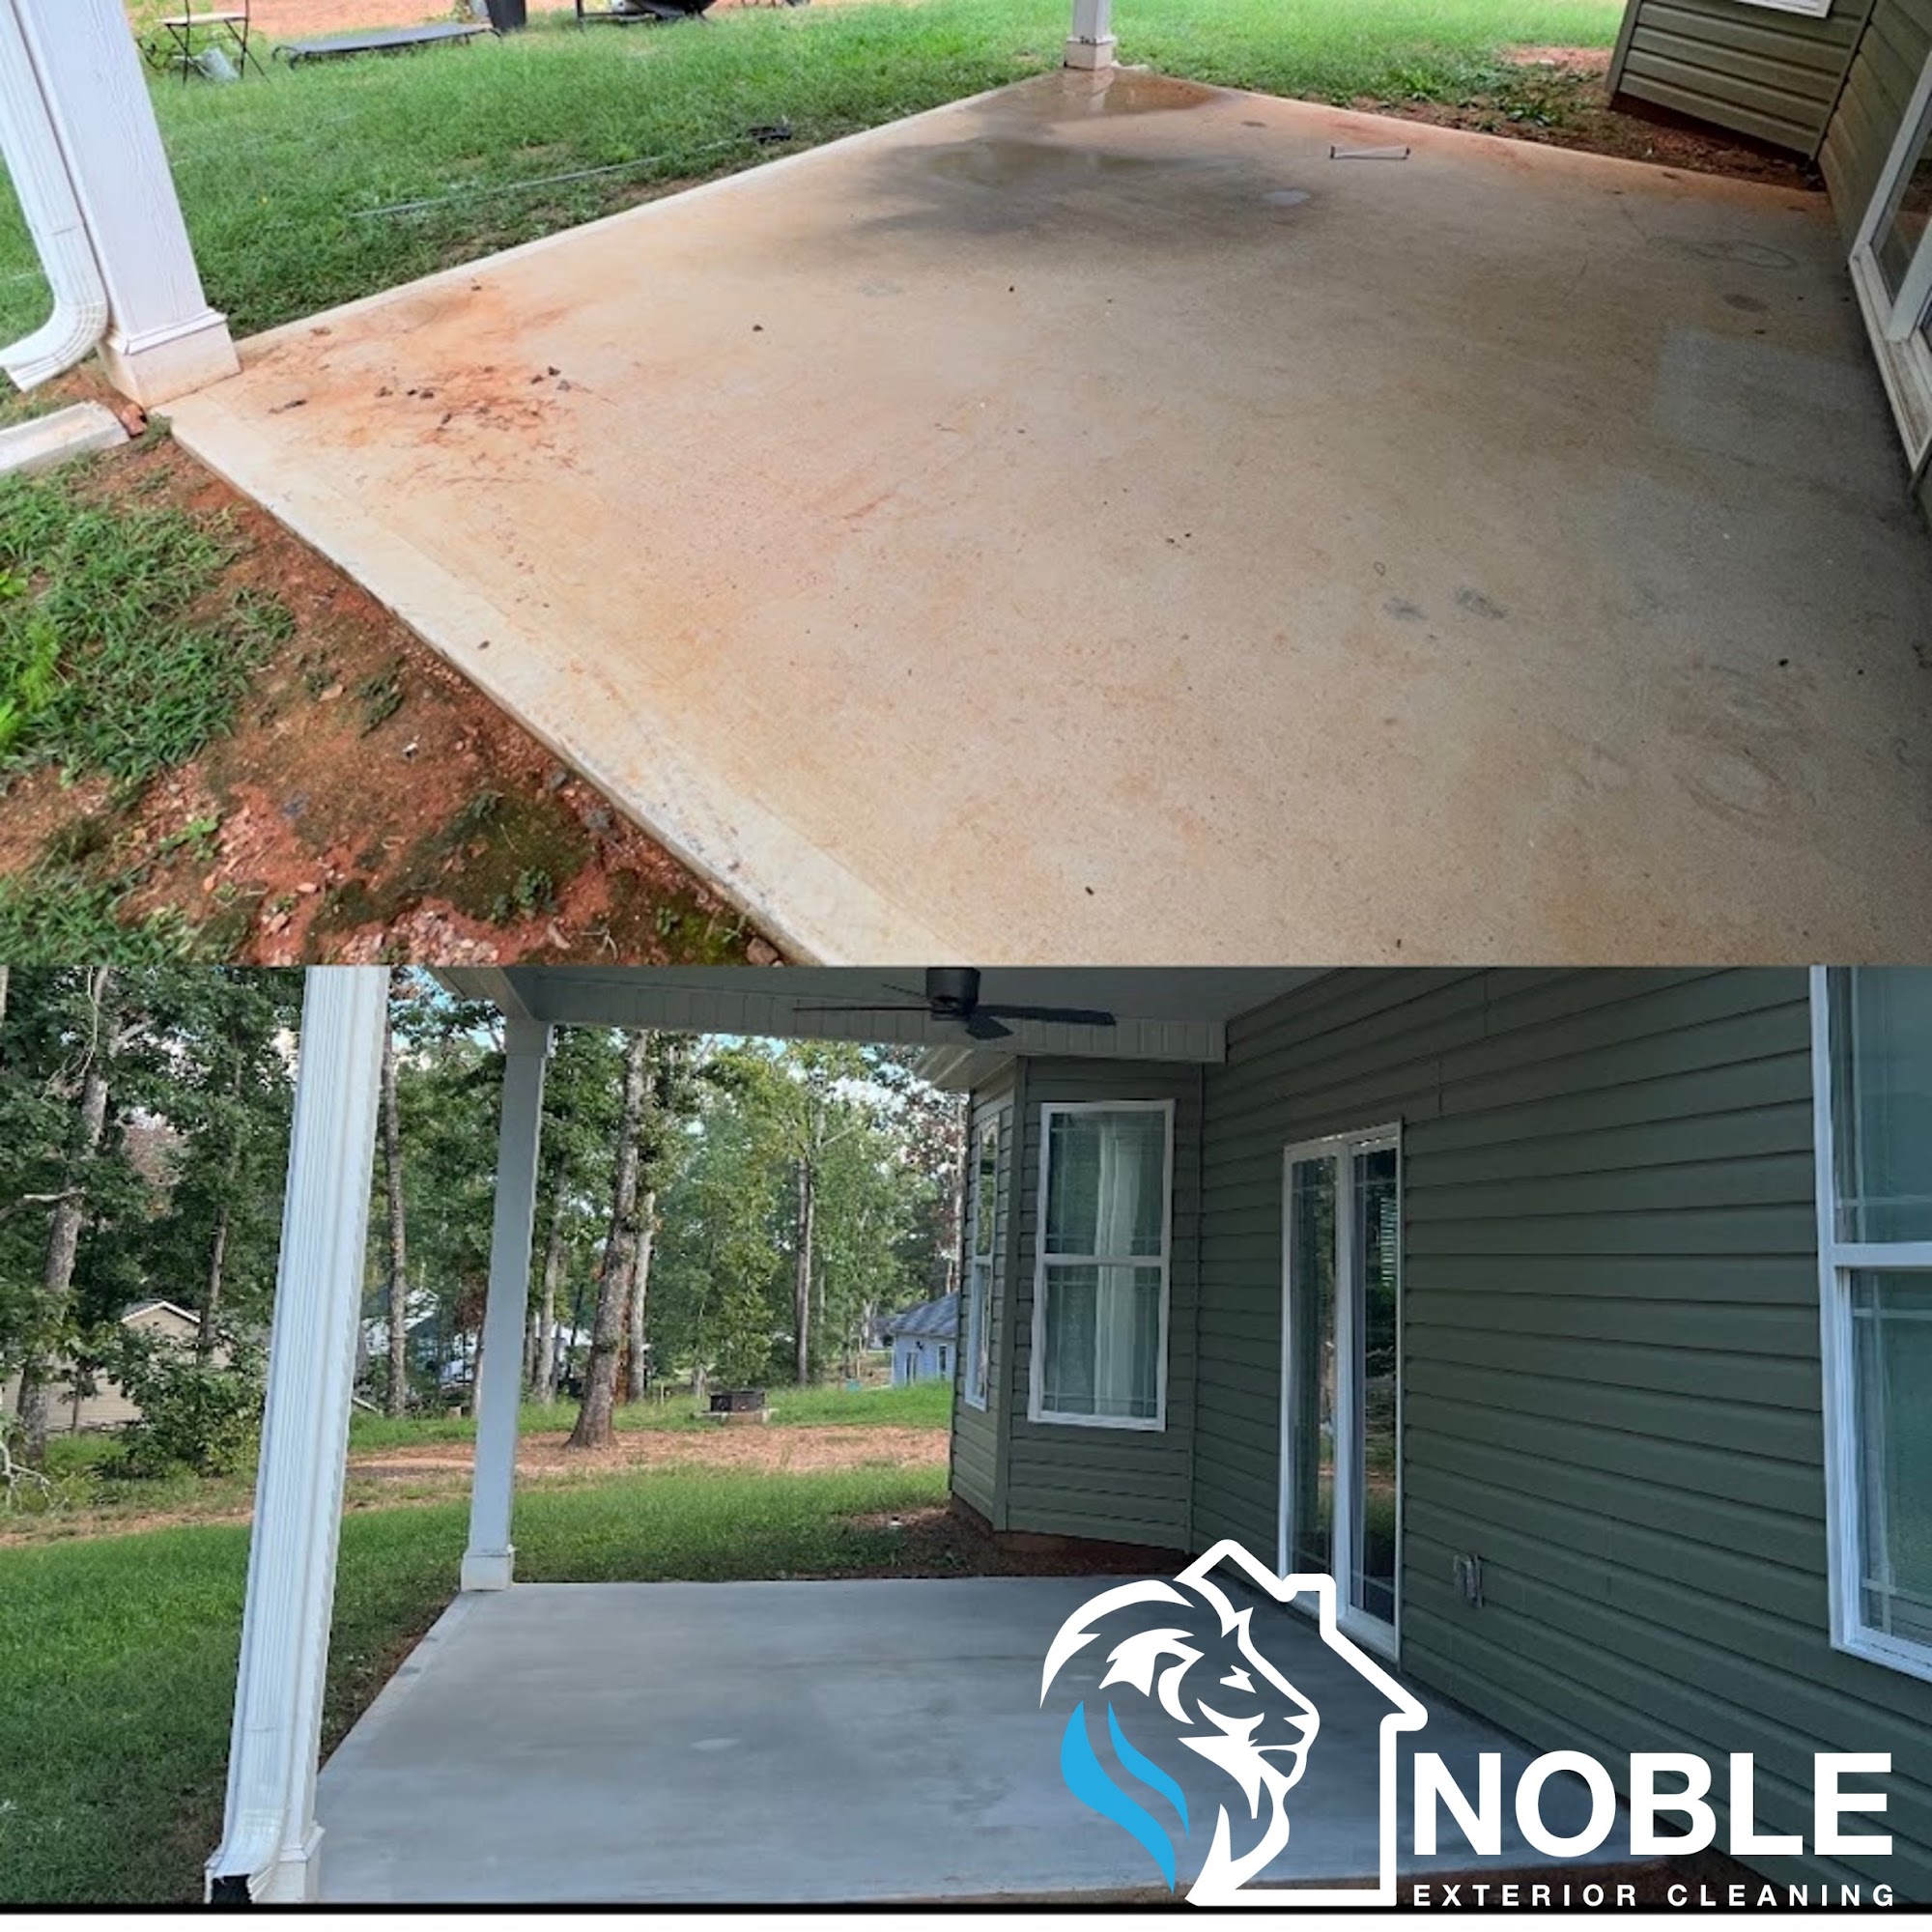 Noble Exterior Cleaning 100 Weathers Cir, Fountain Inn South Carolina 29644